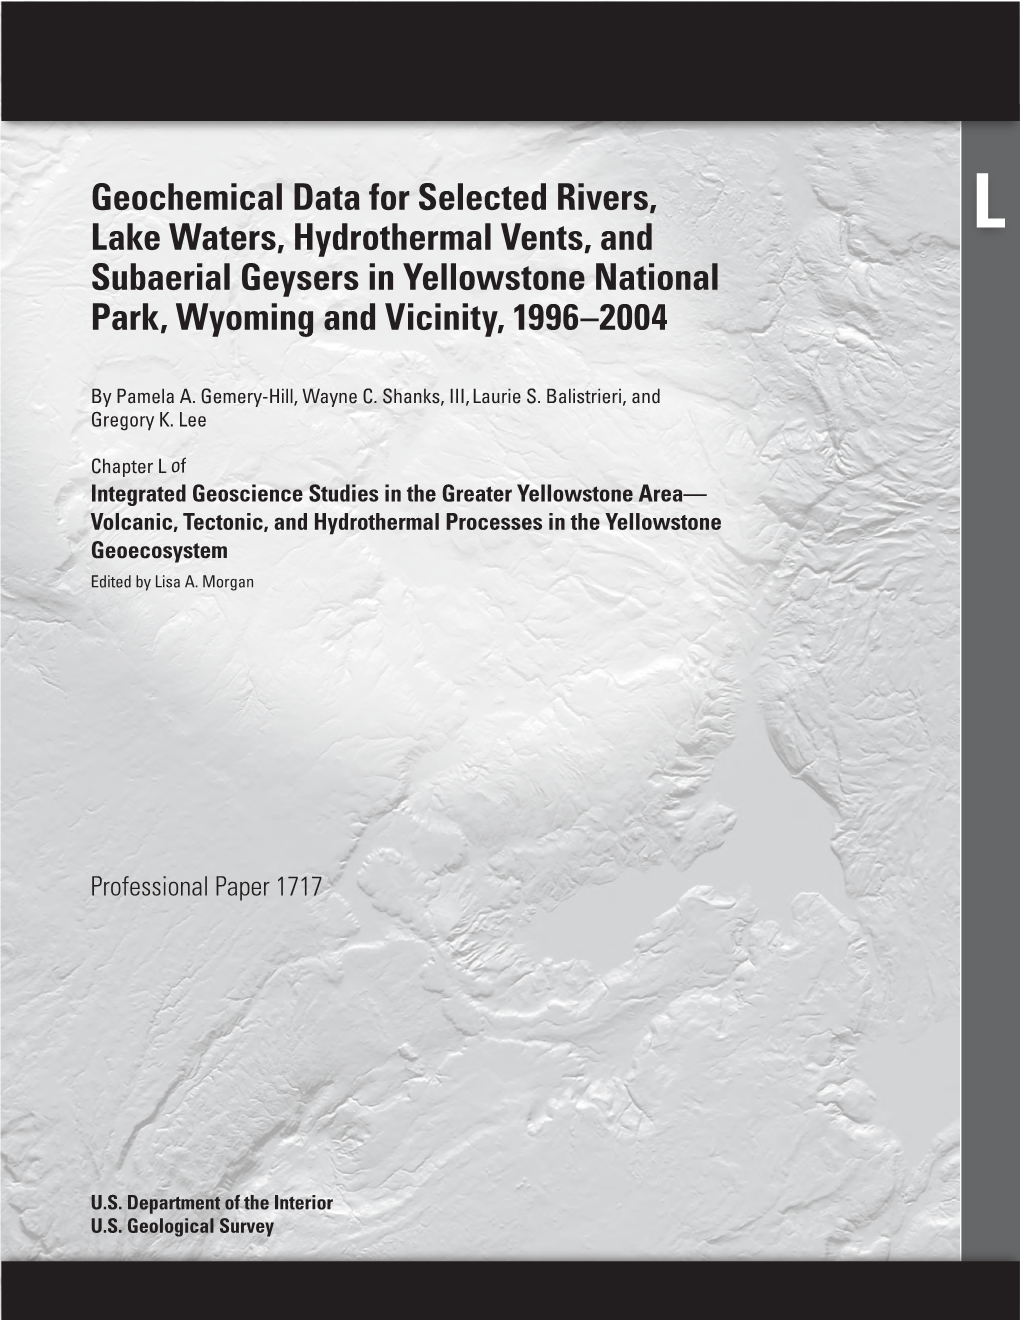 Geochemical Data for Selected Rivers, Lake Waters, Hydrothermal Vents, and L Subaerial Geysers in Yellowstone National Park, Wyoming and Vicinity, 1996–2004